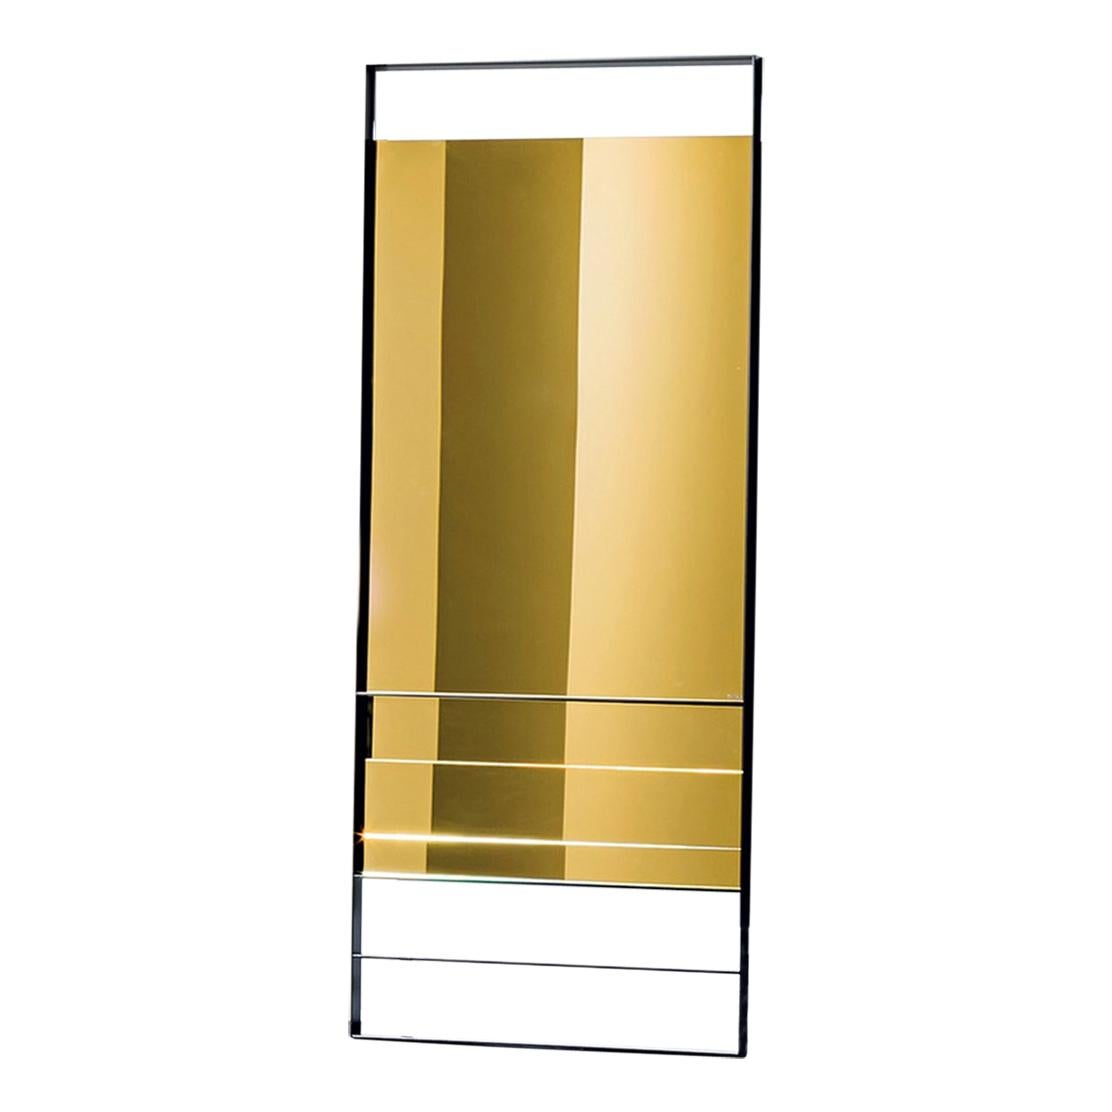 Visual Rectangular Mirror, Made in Italy, In stock in Los Angeles